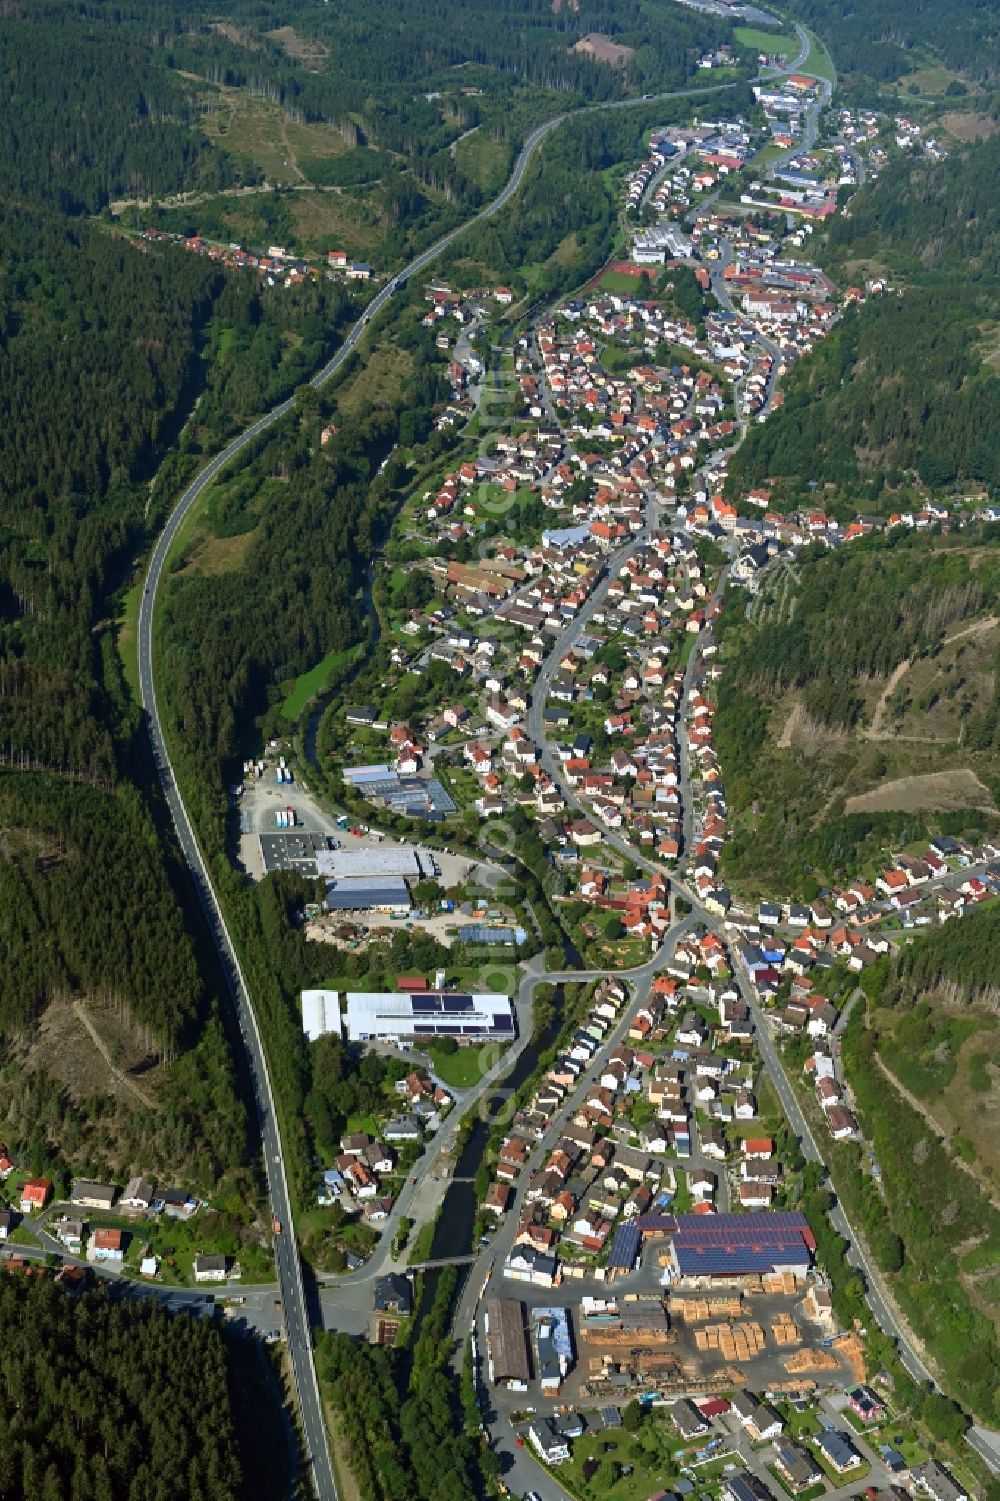 Wallenfels from above - Location view of the streets and houses of residential areas in the valley landscape surrounded by mountains in Wallenfels in the state Bavaria, Germany